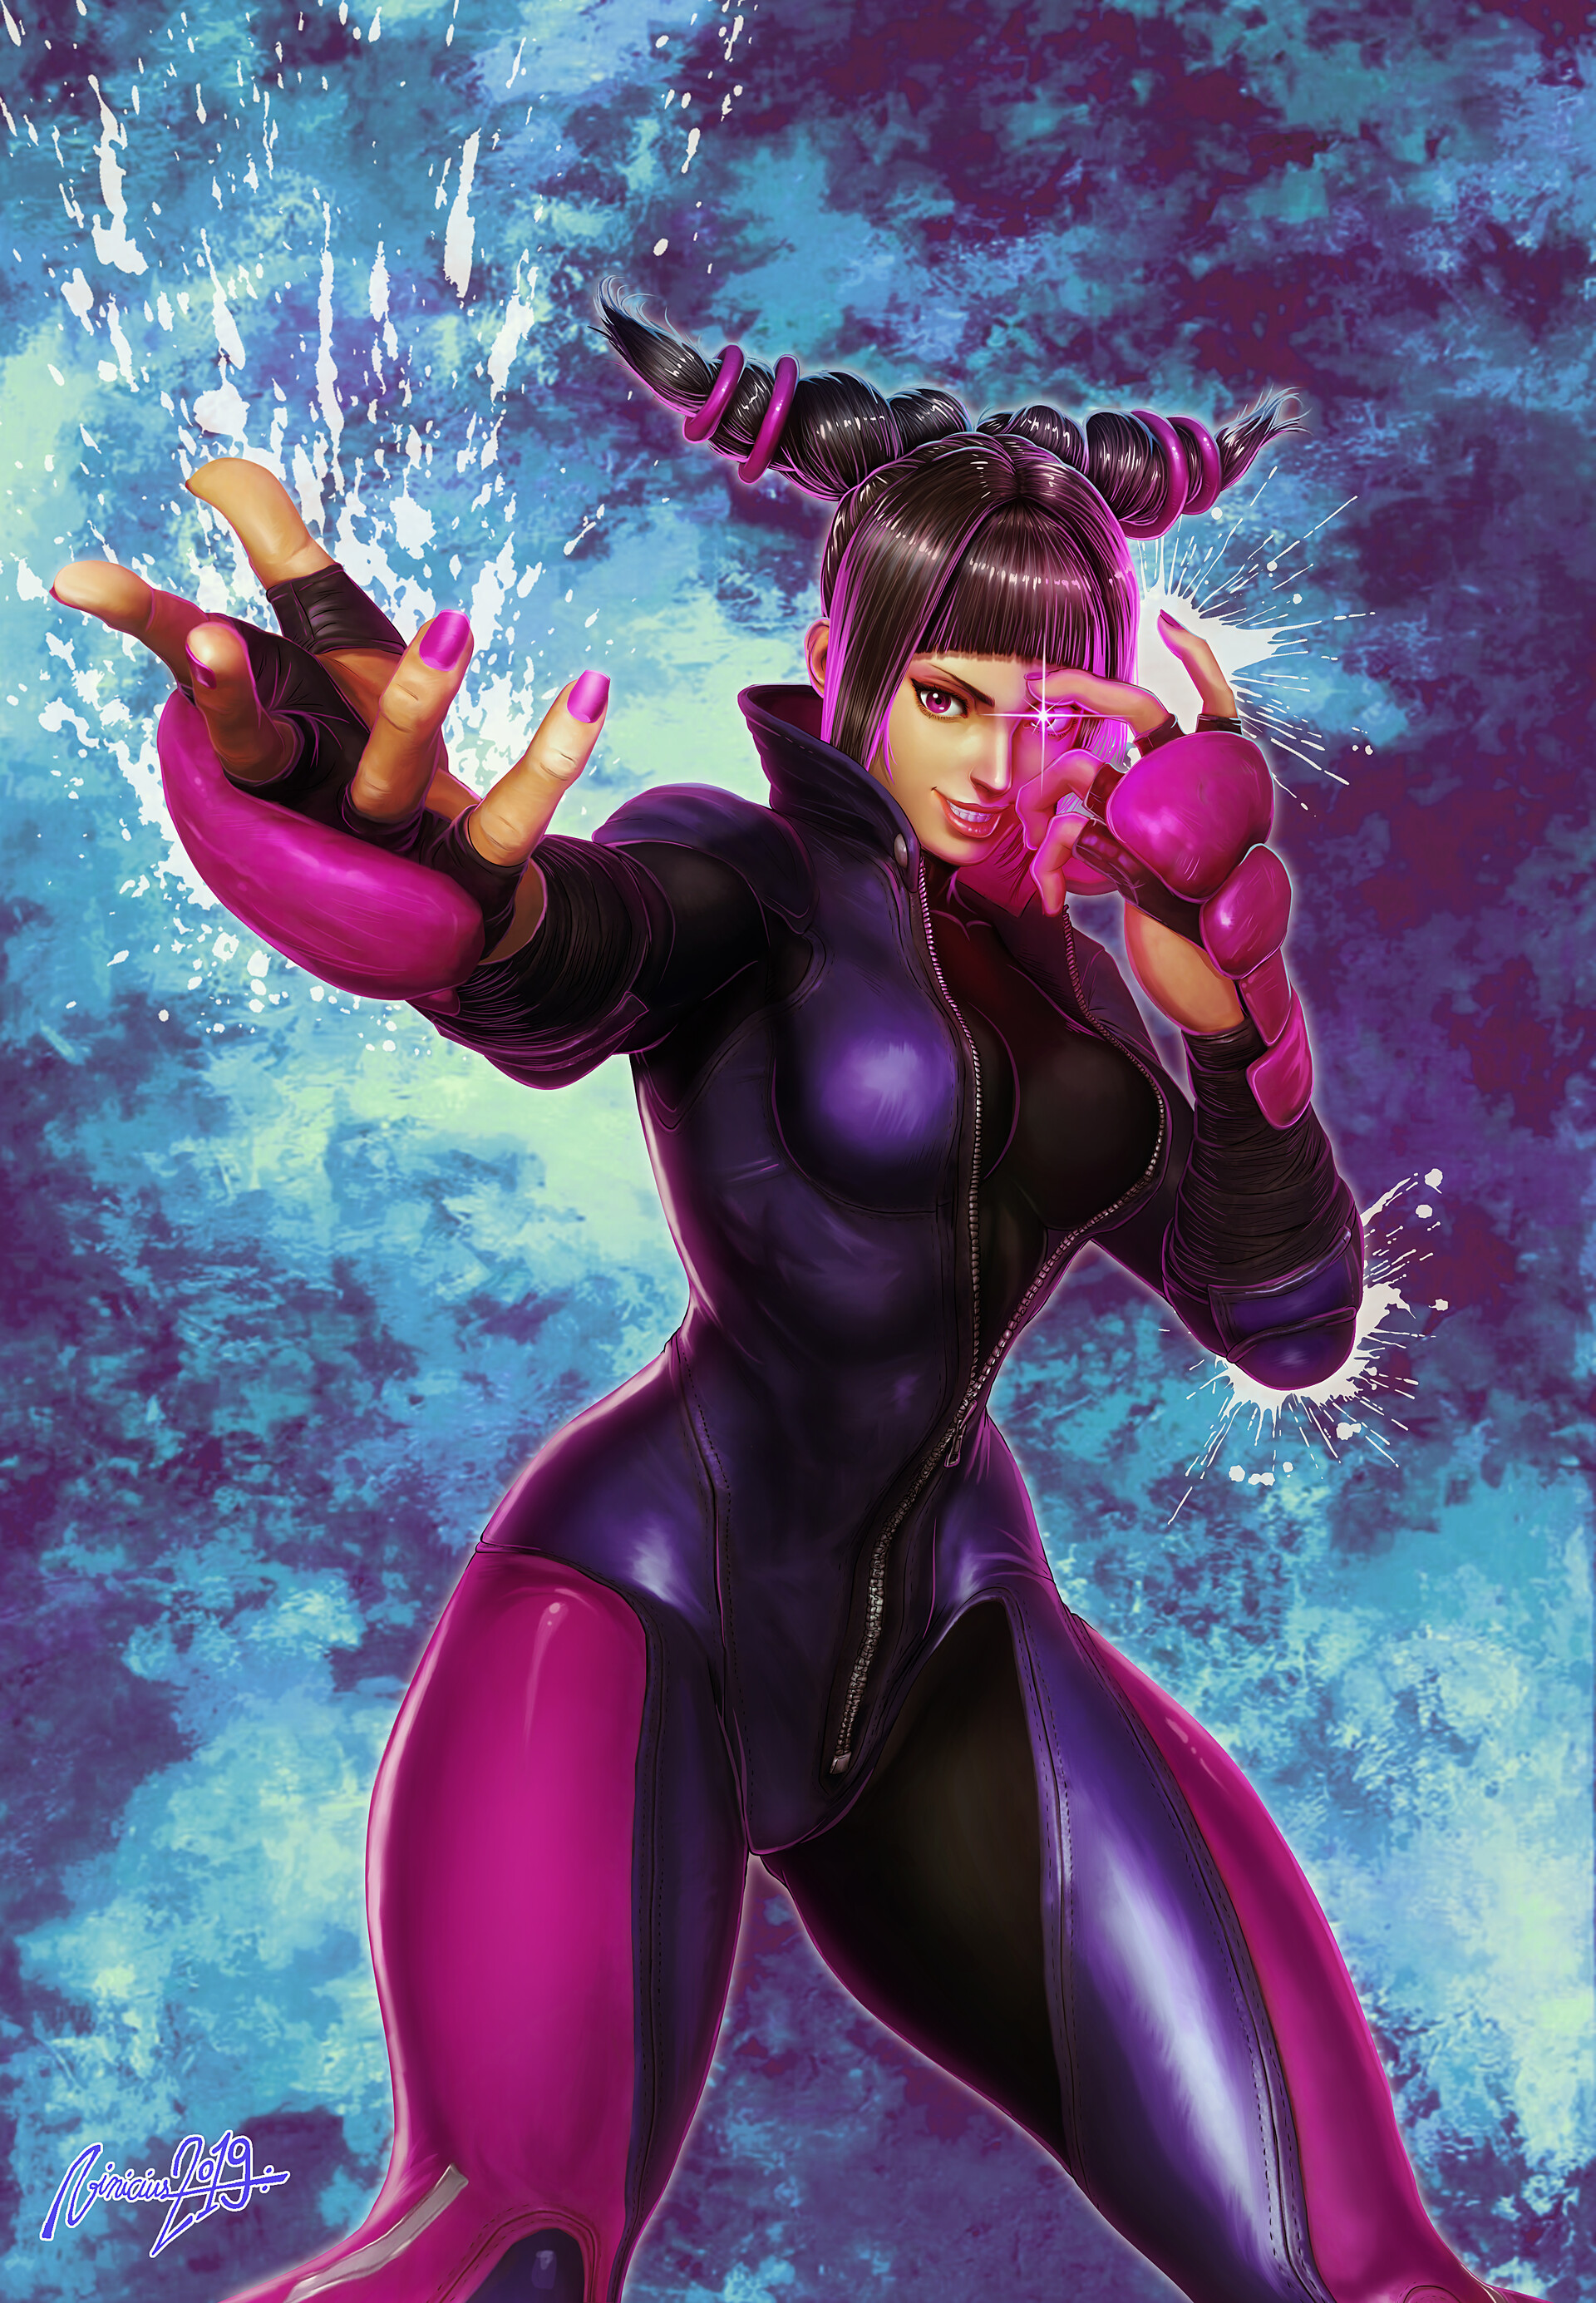 Juri Street fighter ® Capcom® Art and Colors by Vinicius Moura.